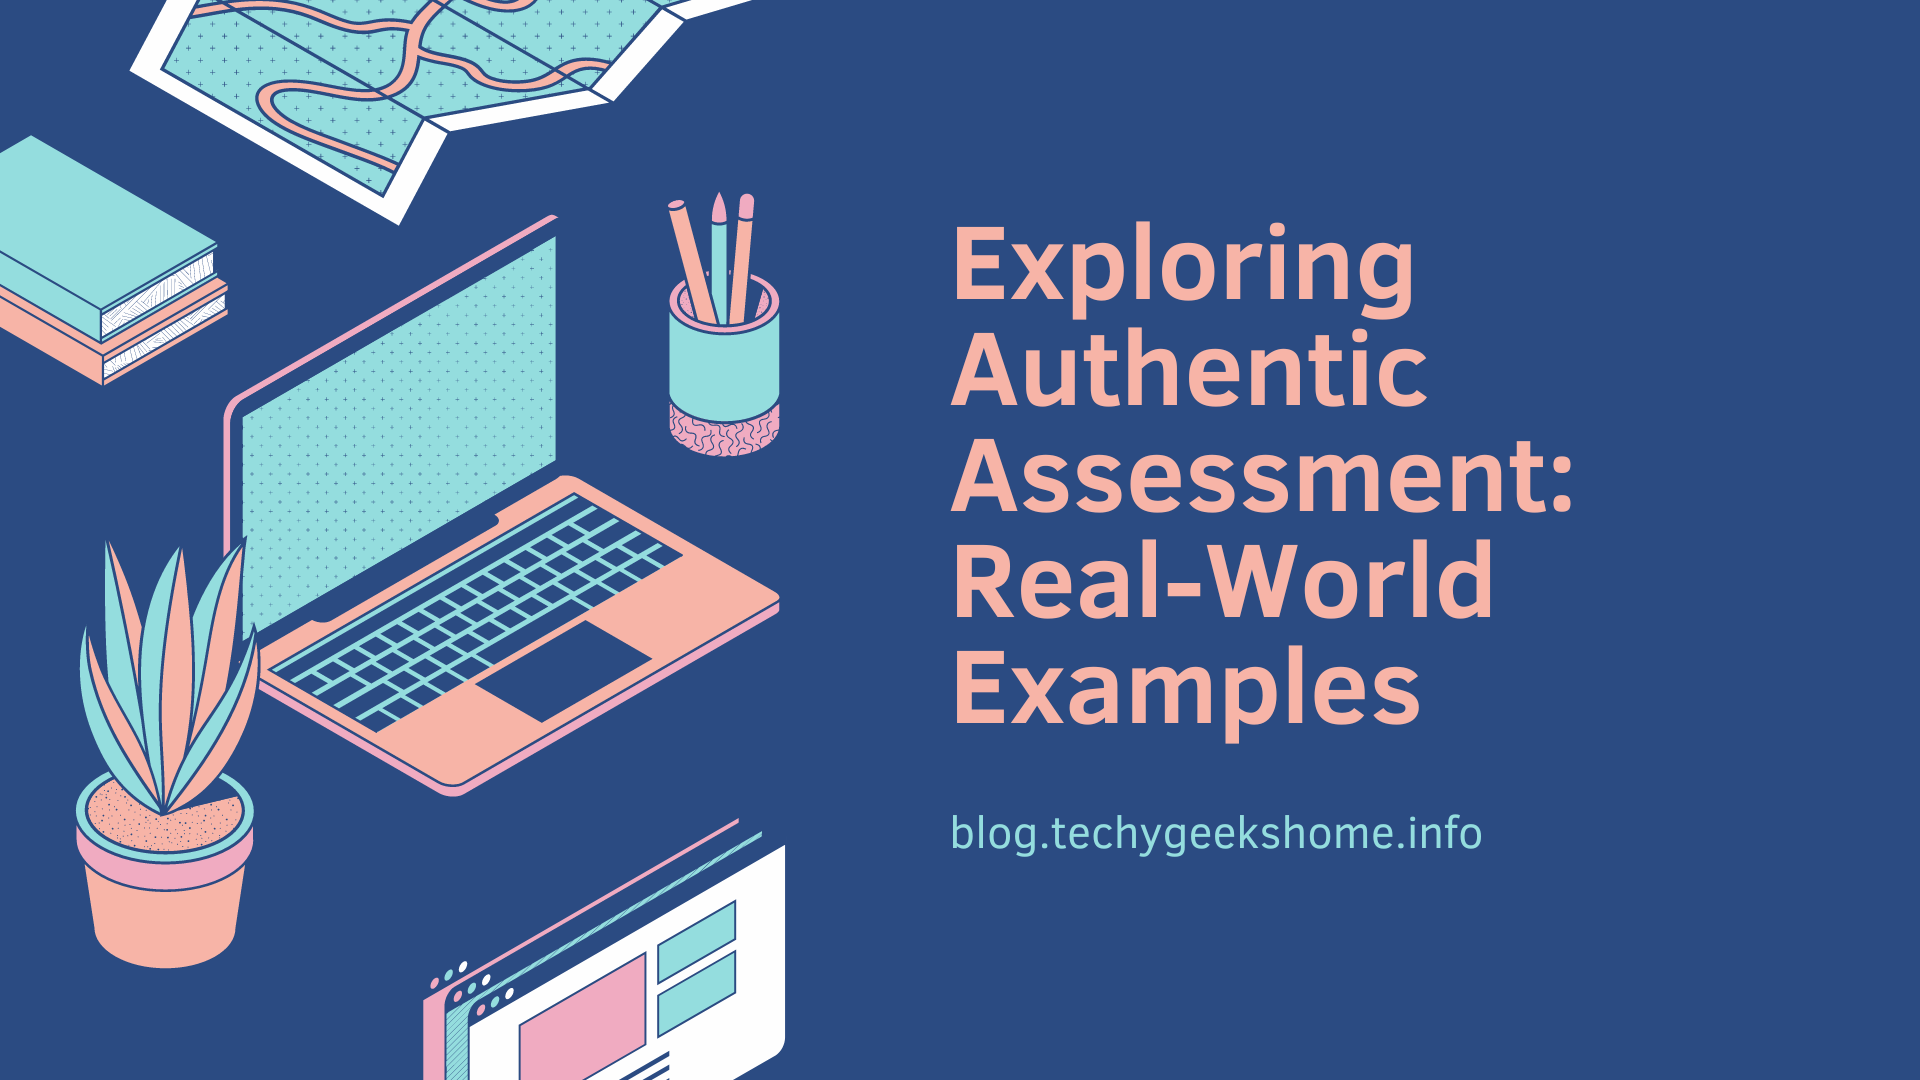 Exploring Authentic Assessment: Real-World Examples